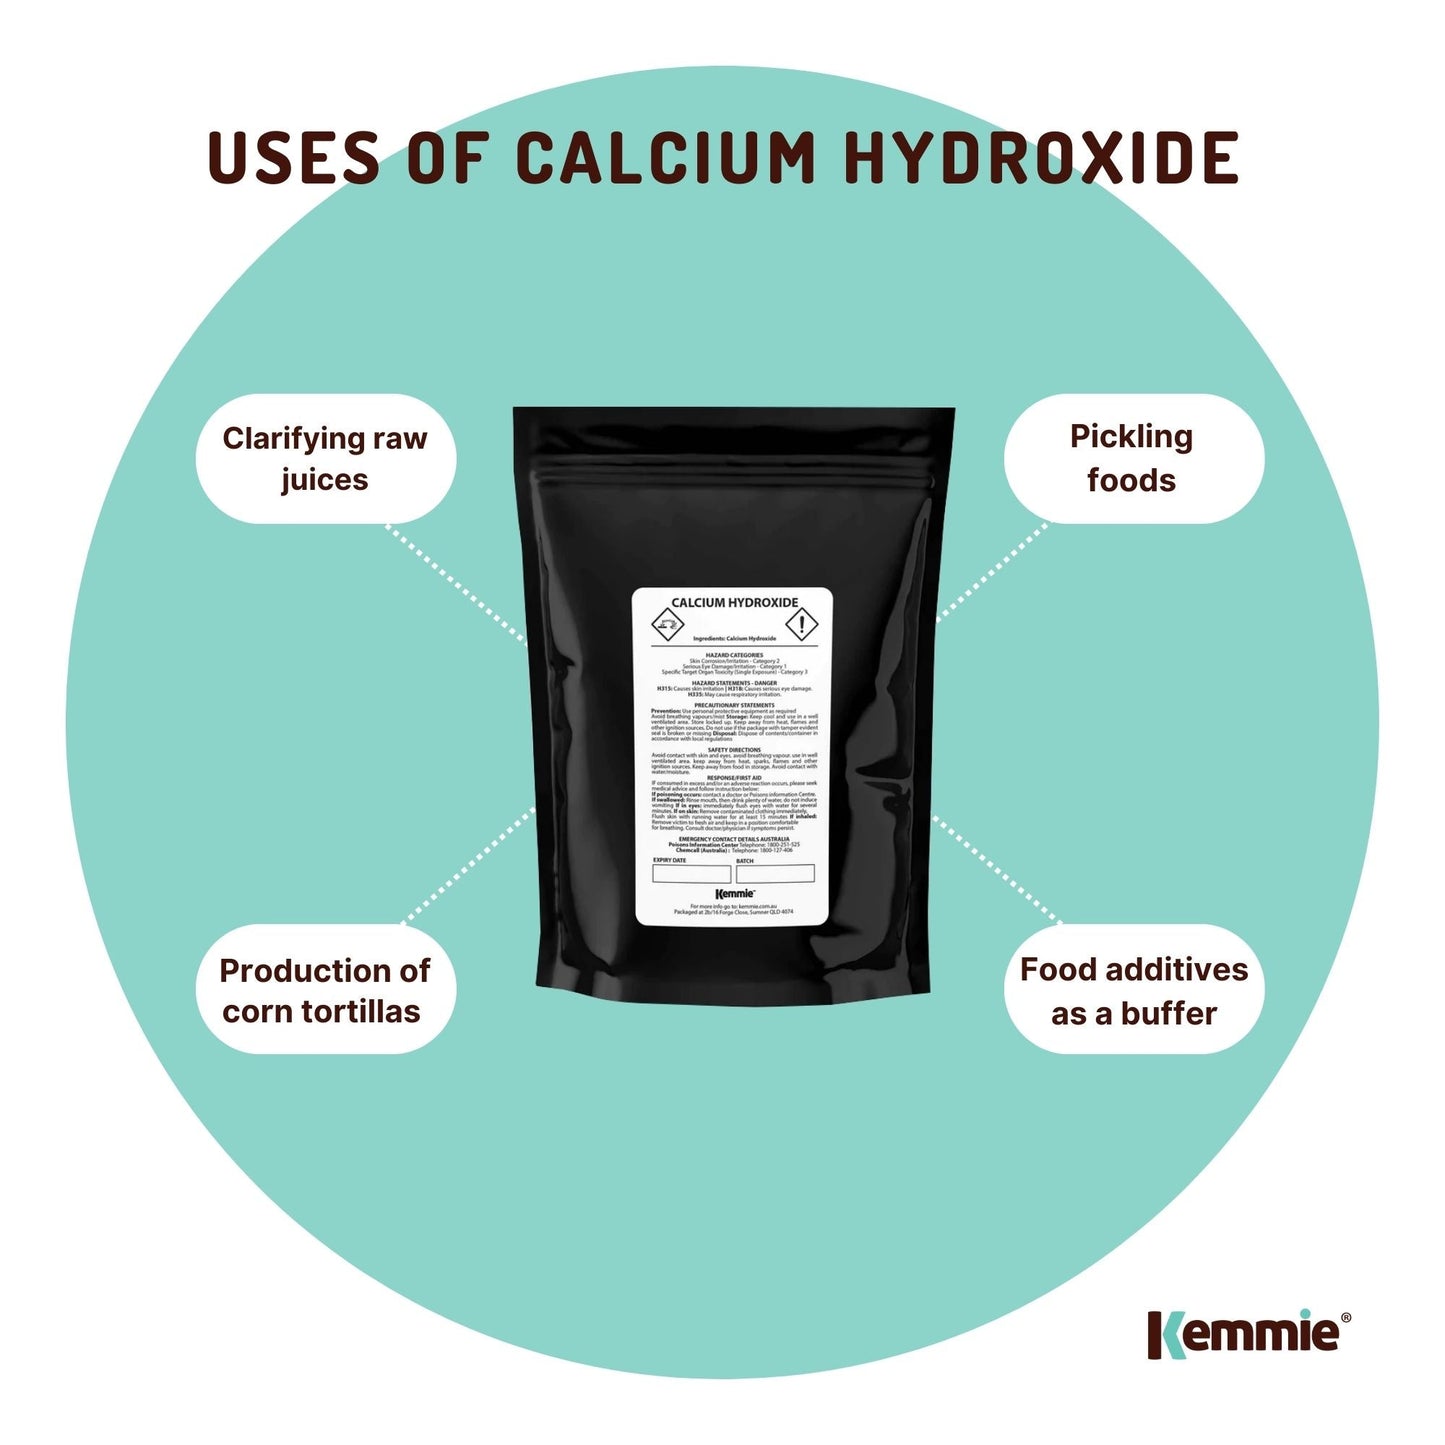 100g Food Grade Calcium Hydroxide Powder - FCC Hydrated Slaked Pickling Lime